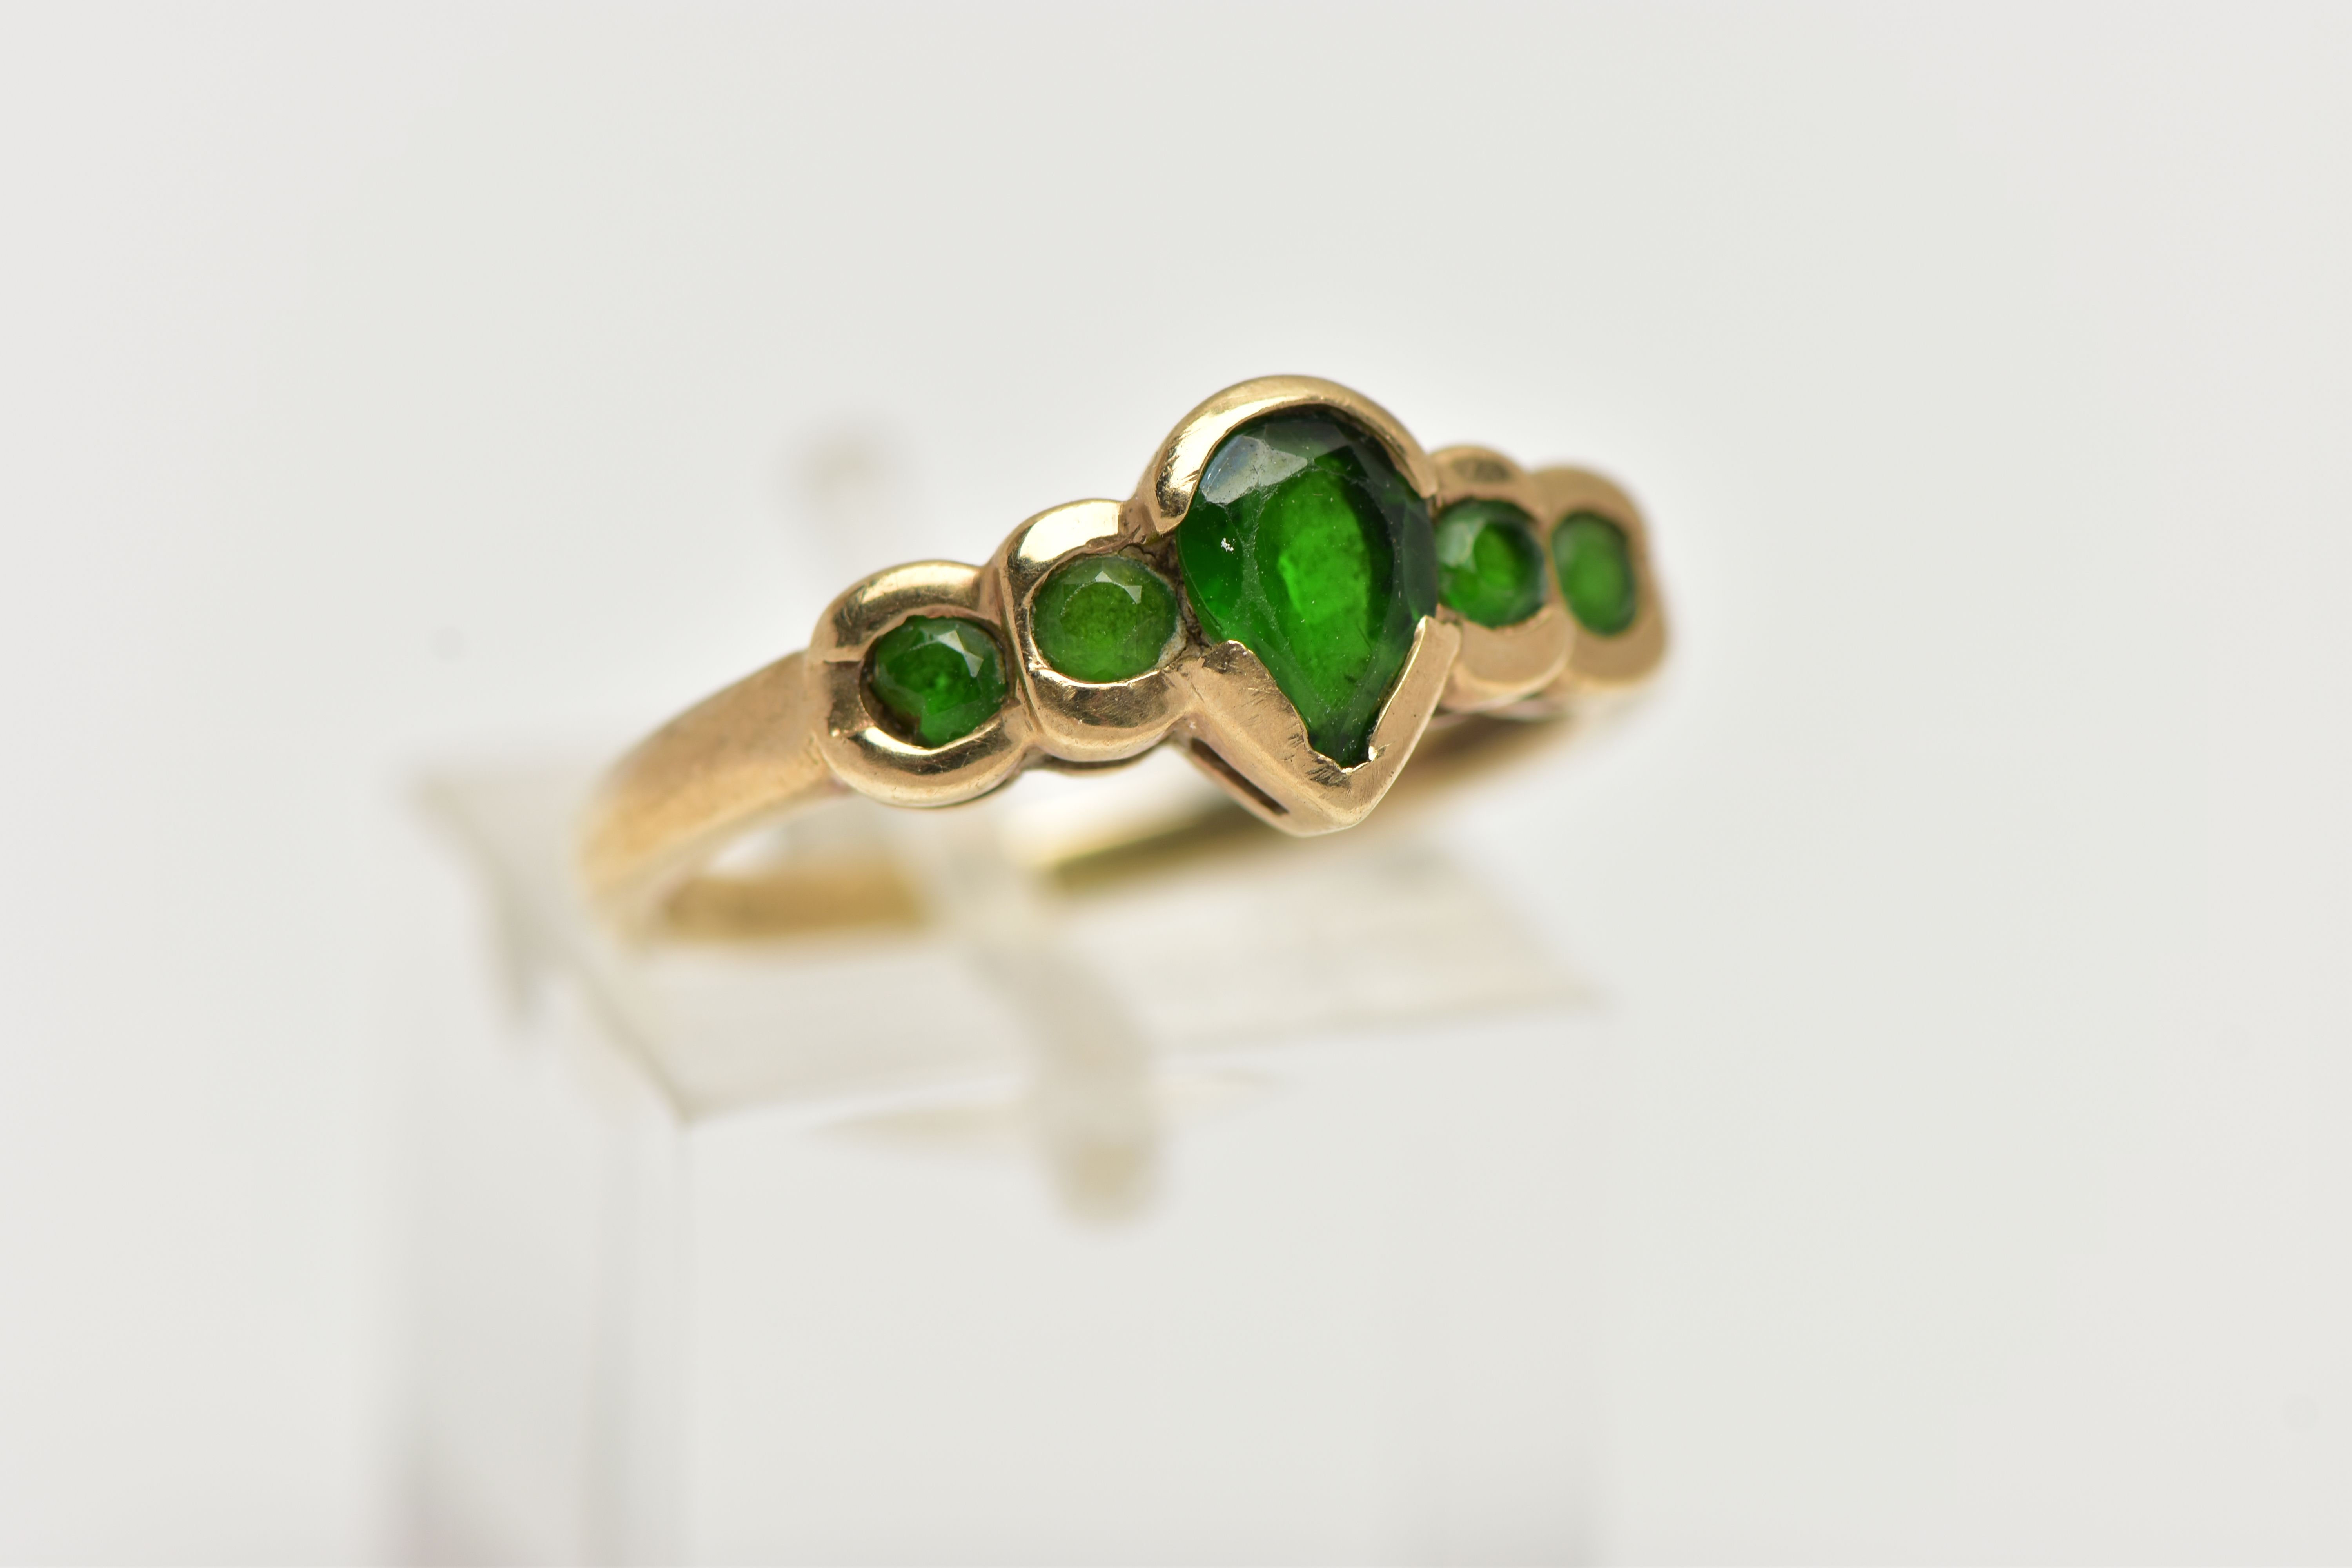 A 9CT GOLD CHROME DIOPSIDE RING, designed with a central pear cut stone flanked with four smaller - Image 4 of 4